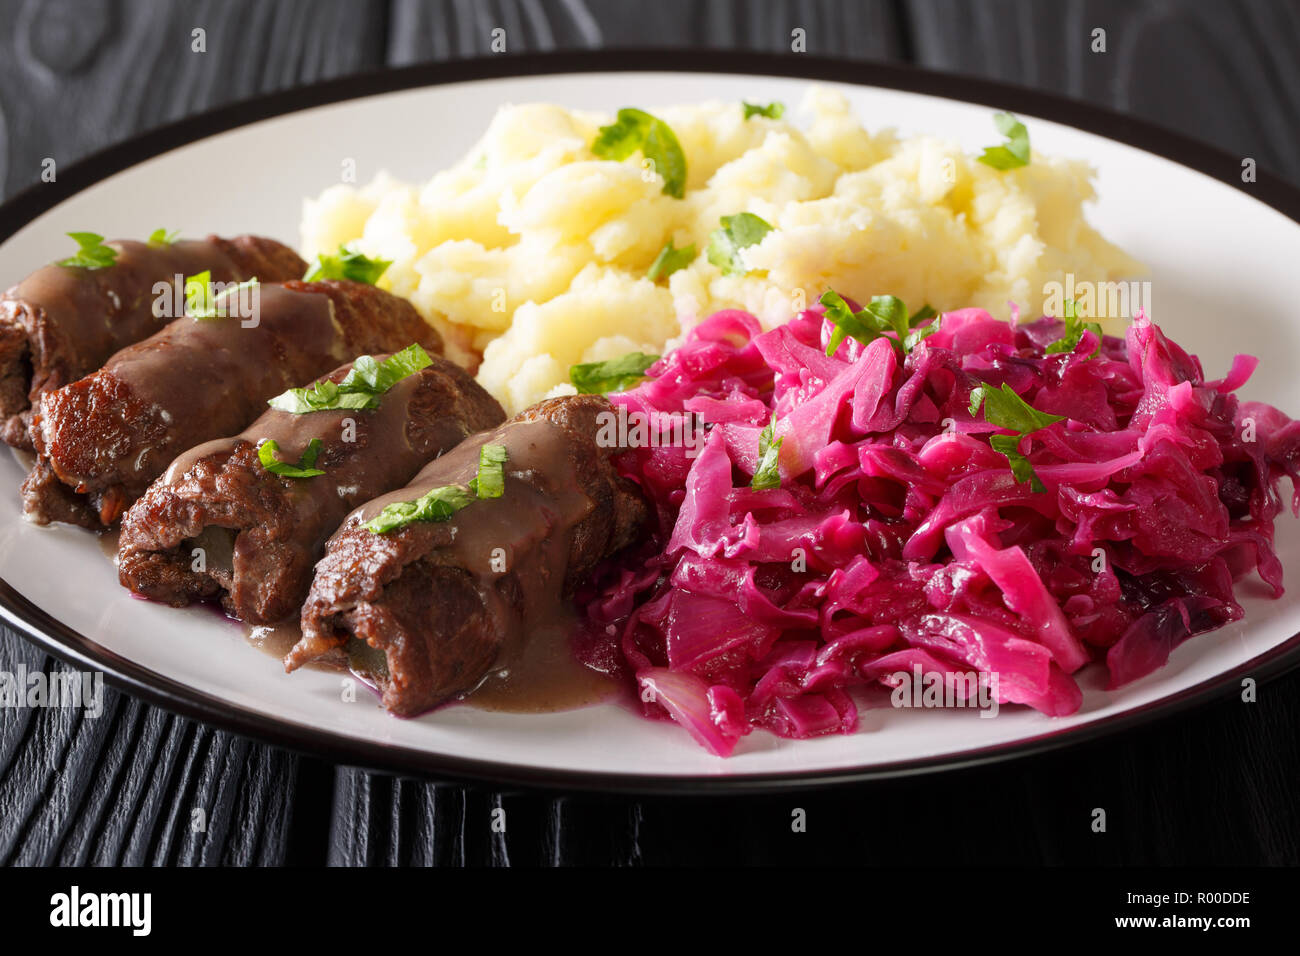 German beef rouladen recipe, along with mashed potato and red cabbage close-up on a plate. horizontal Stock Photo